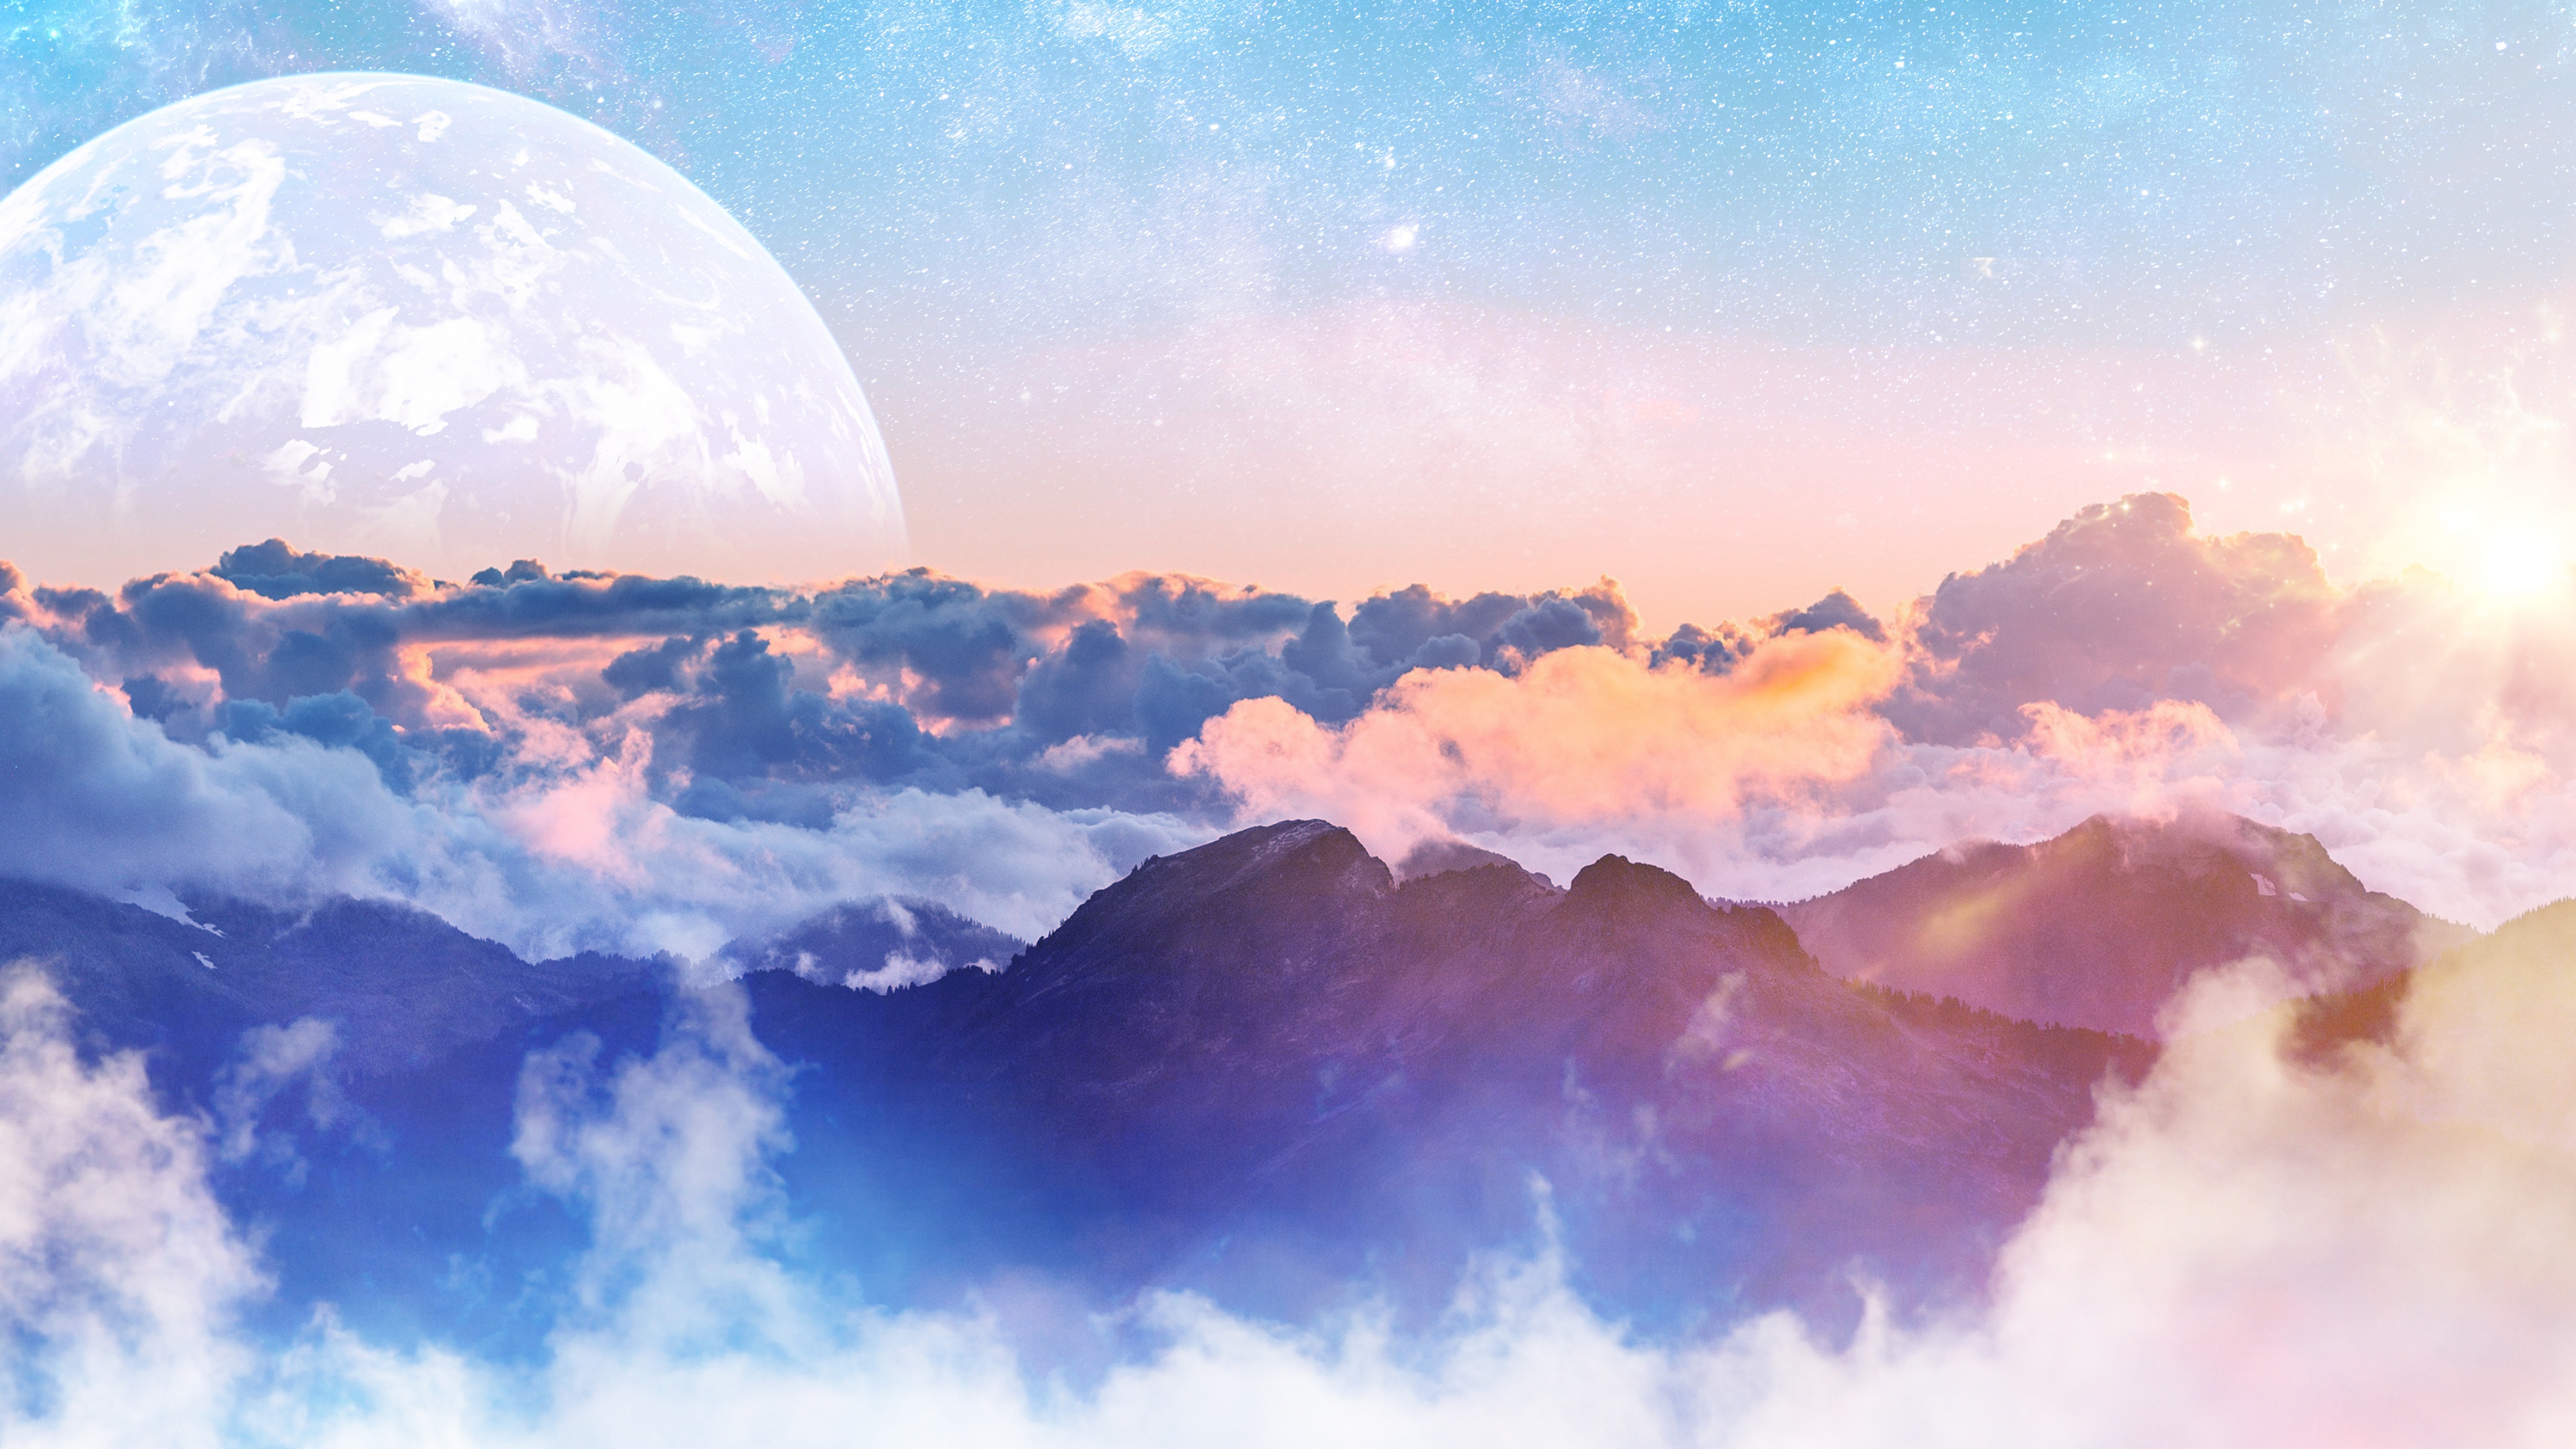 Above clouds Wallpaper 4K, Moon, Planet, Mountains, Nature, #1136